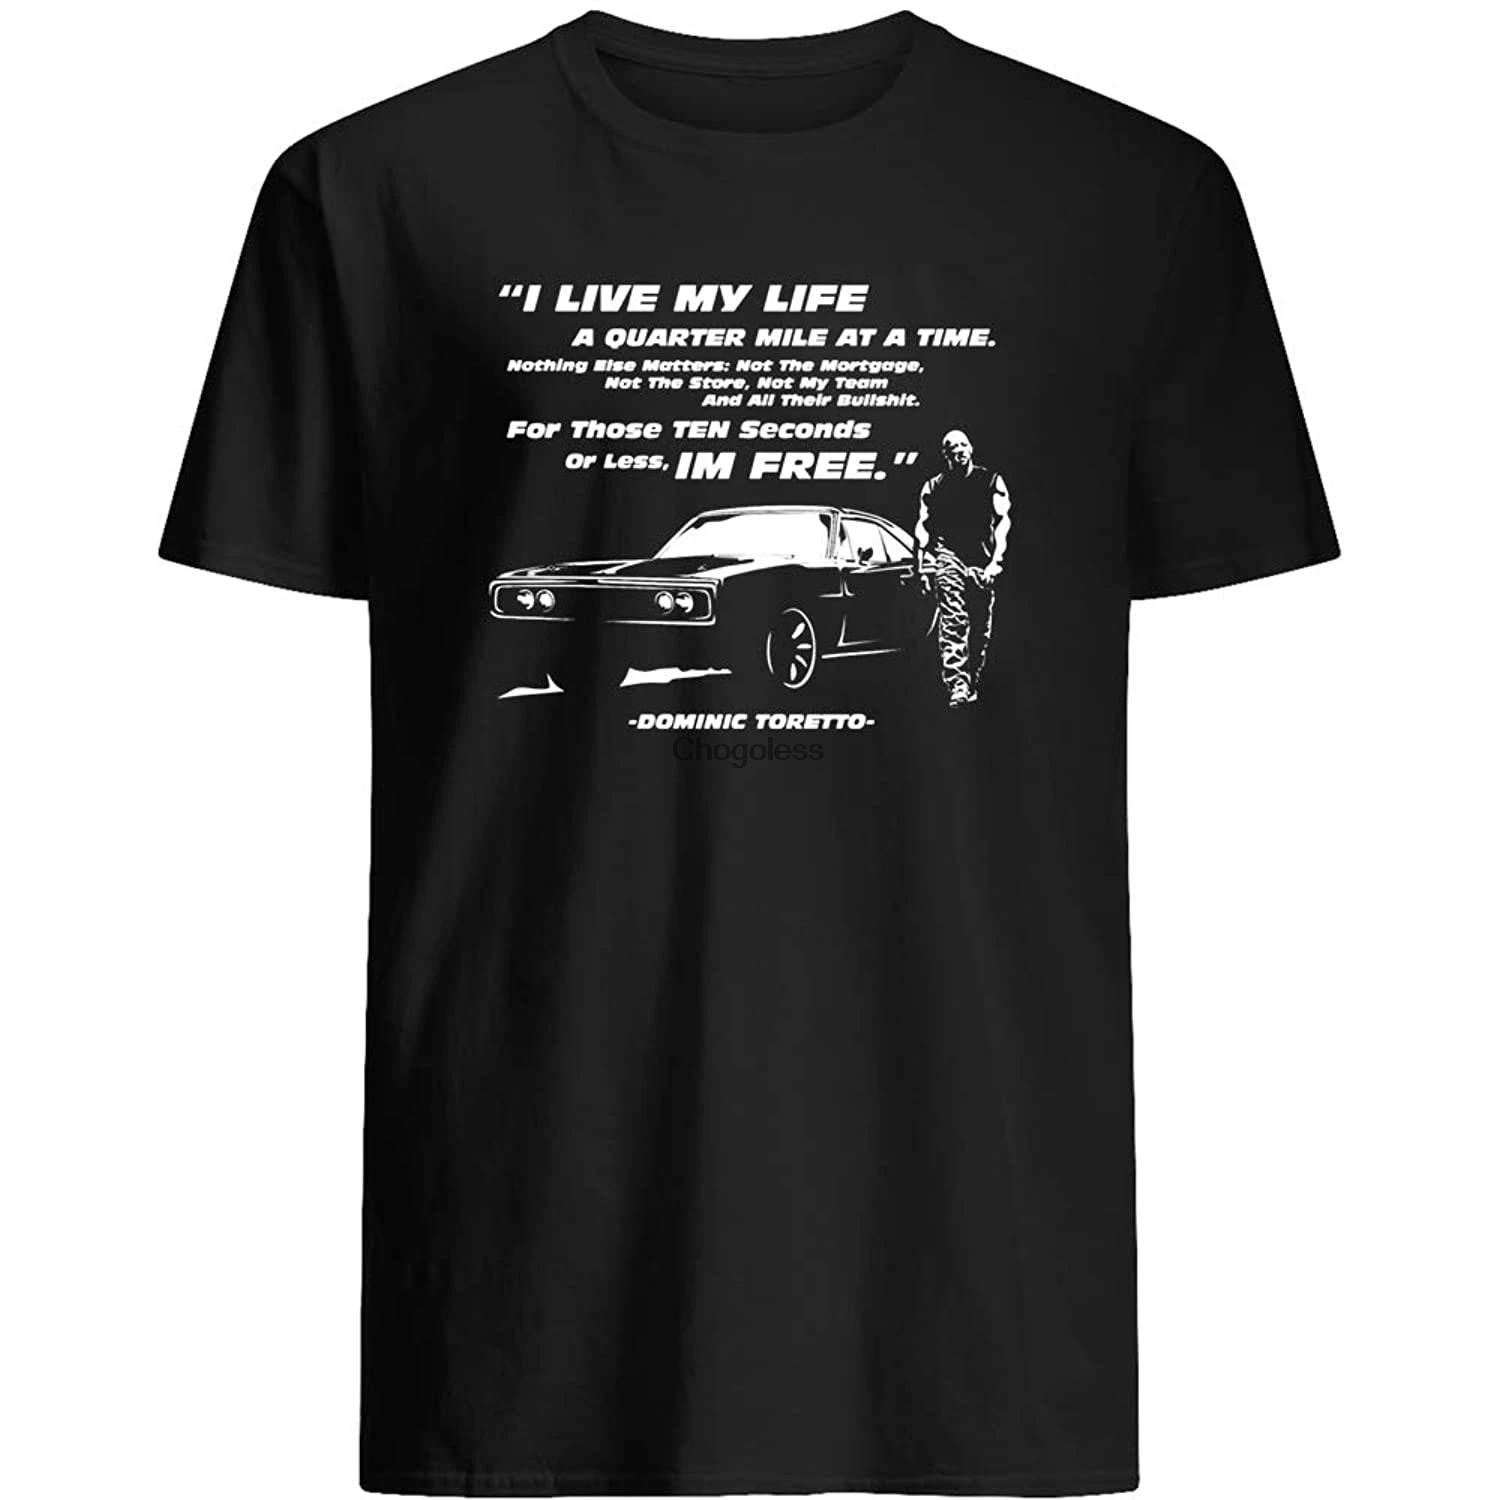 

PERIPATETIC I Live My Life a Quarter Mile at a time Racing Fast Movies furiousDominic Toretto Brian O'Conner Unisex T-Shirt